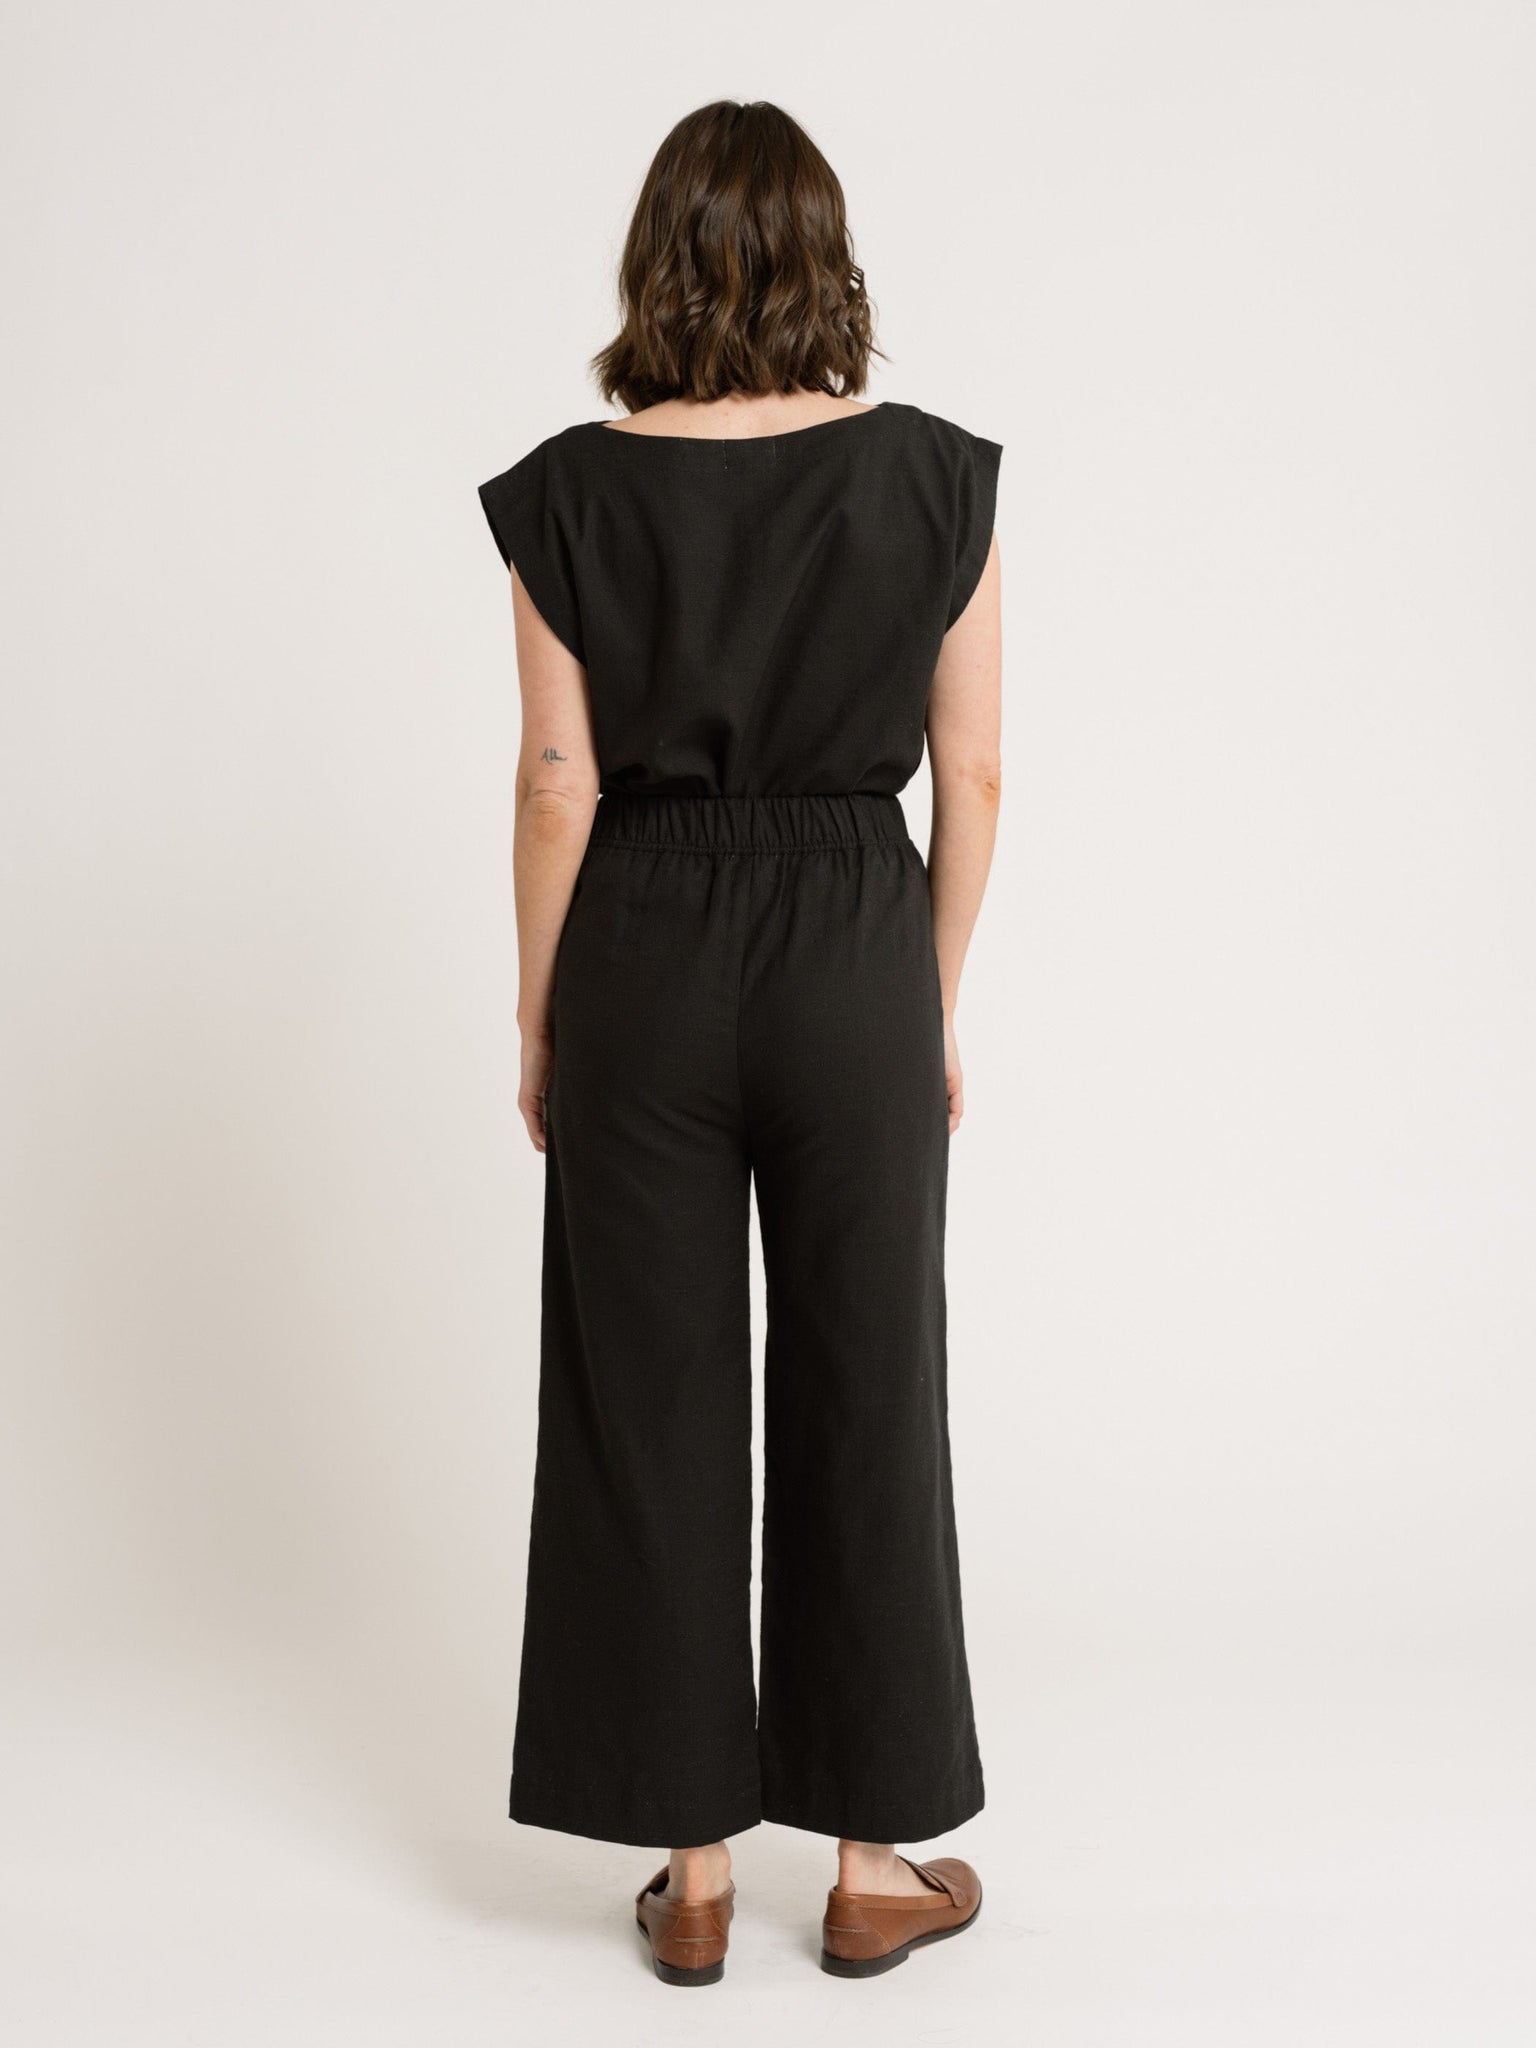 A woman in a high-waisted, wide-leg Everyday Crop Pant - Black Cotton jumpsuit.